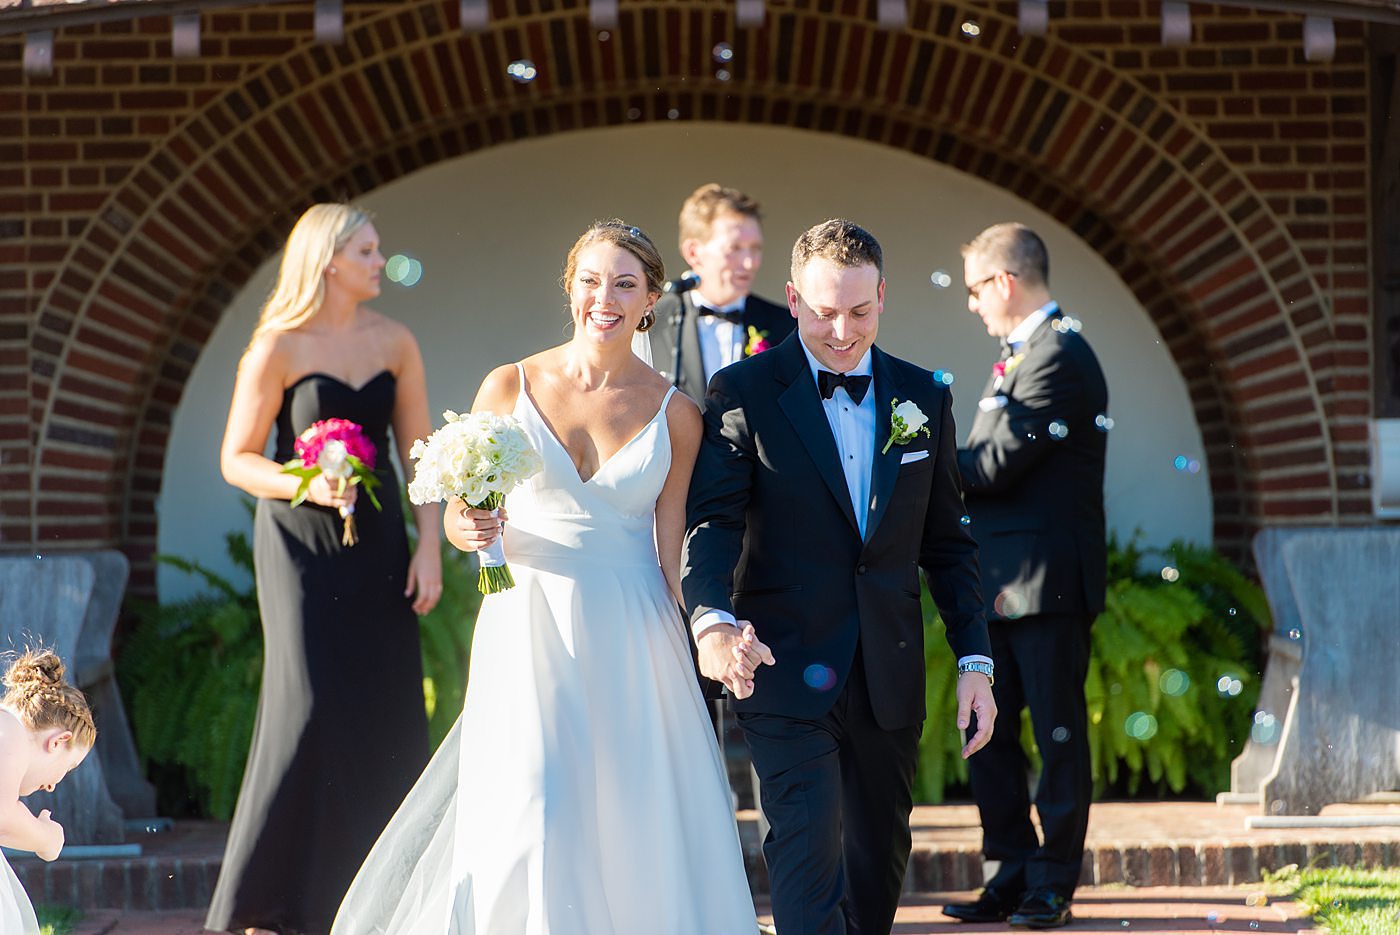 Photos by Mikkel Paige Photography at Waveny House wedding venue in New Canaan, Connecticut. This beautiful venue has an outdoor garden for the ceremony and indoor historic home for the reception. The bride and groom were married in a garden outside and had a bubble exit. #mikkelpaige #wavenyhouse #wavenyhousewedding #connecticutweddingvenue #connecticutweddingphotographer #outdoorceremony #gardenceremony #bubbleexit